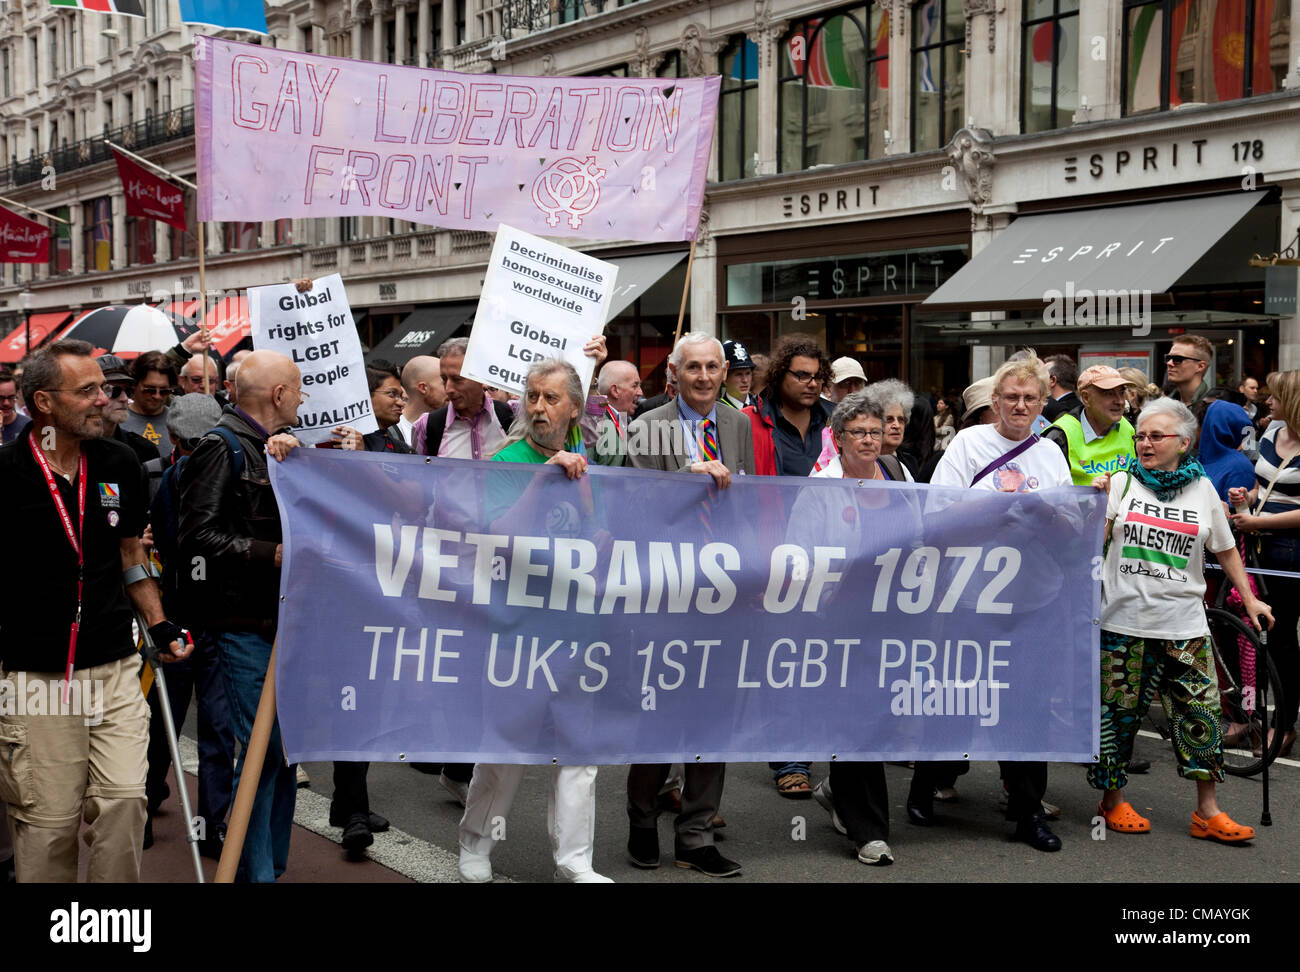 Veterans of the 1st LGBT Pride March in 1972 at the World Pride procession in Regent Street, Central London, UK – 7 July 2012 Stock Photo